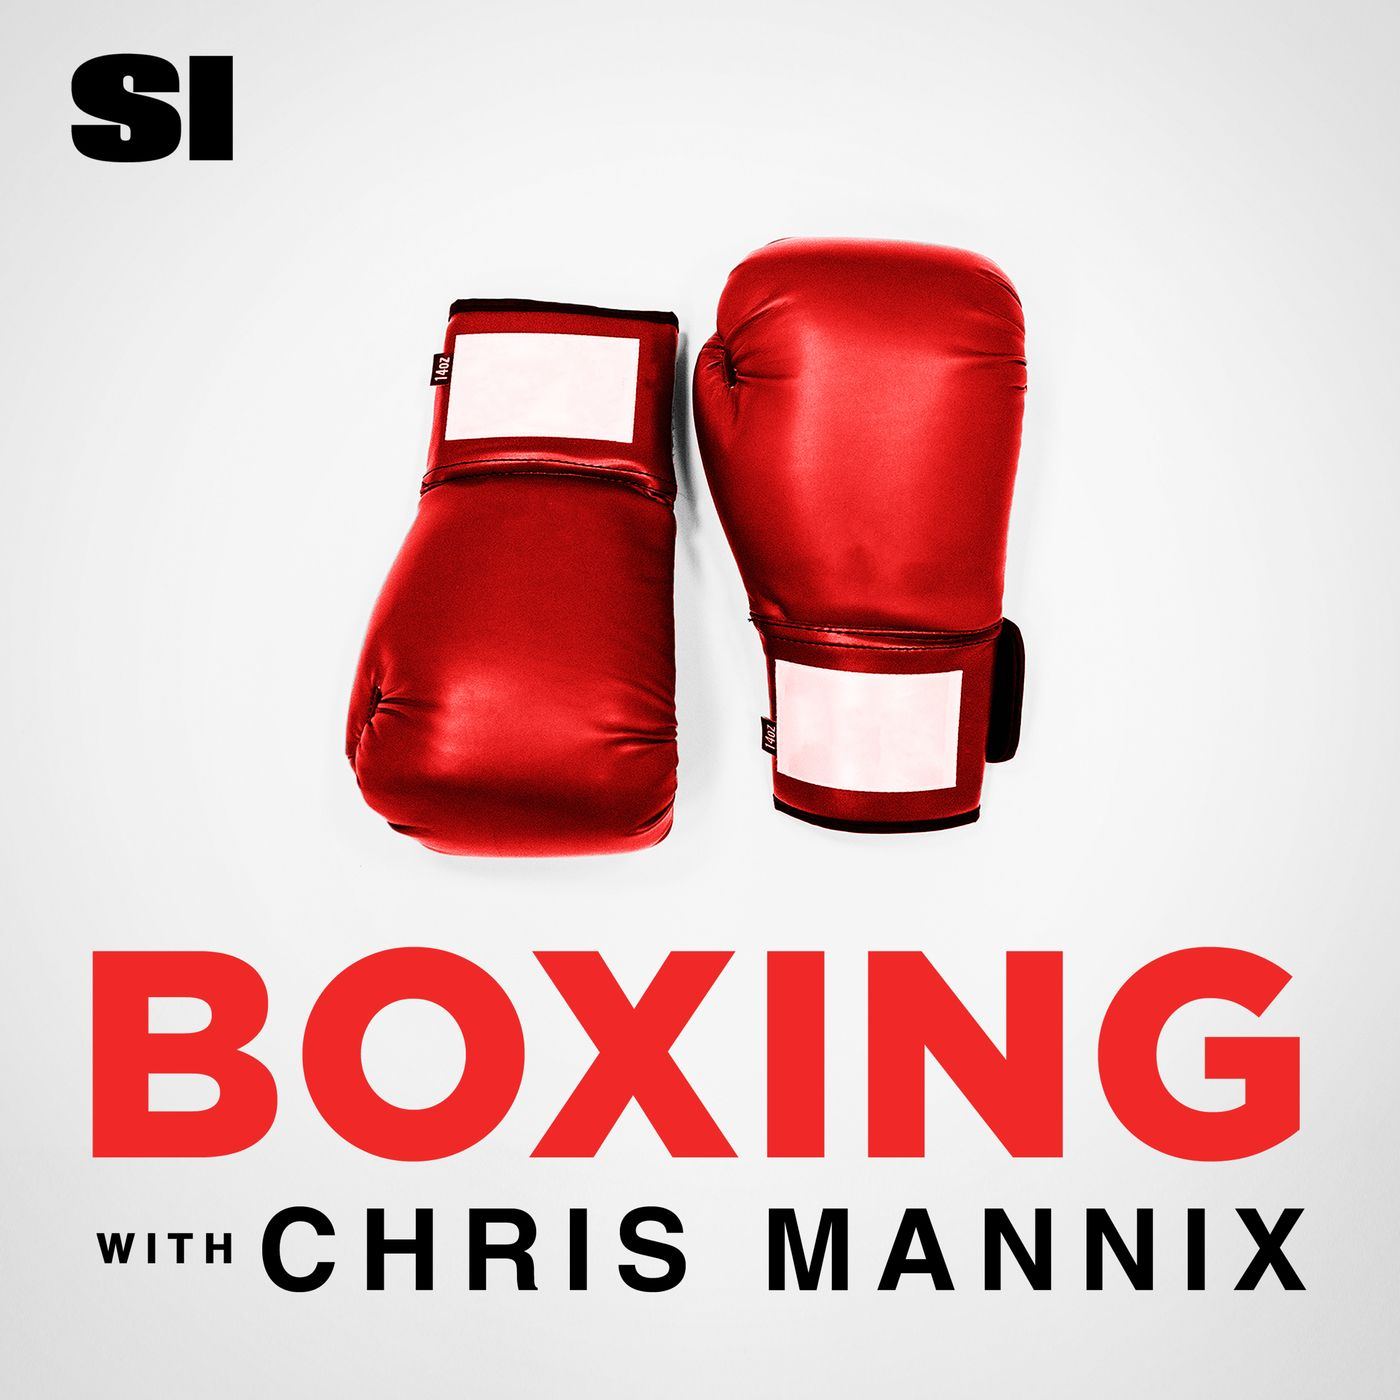 A highlight from Boxing with Chris Mannix - Whats next for Crawford and Spence?